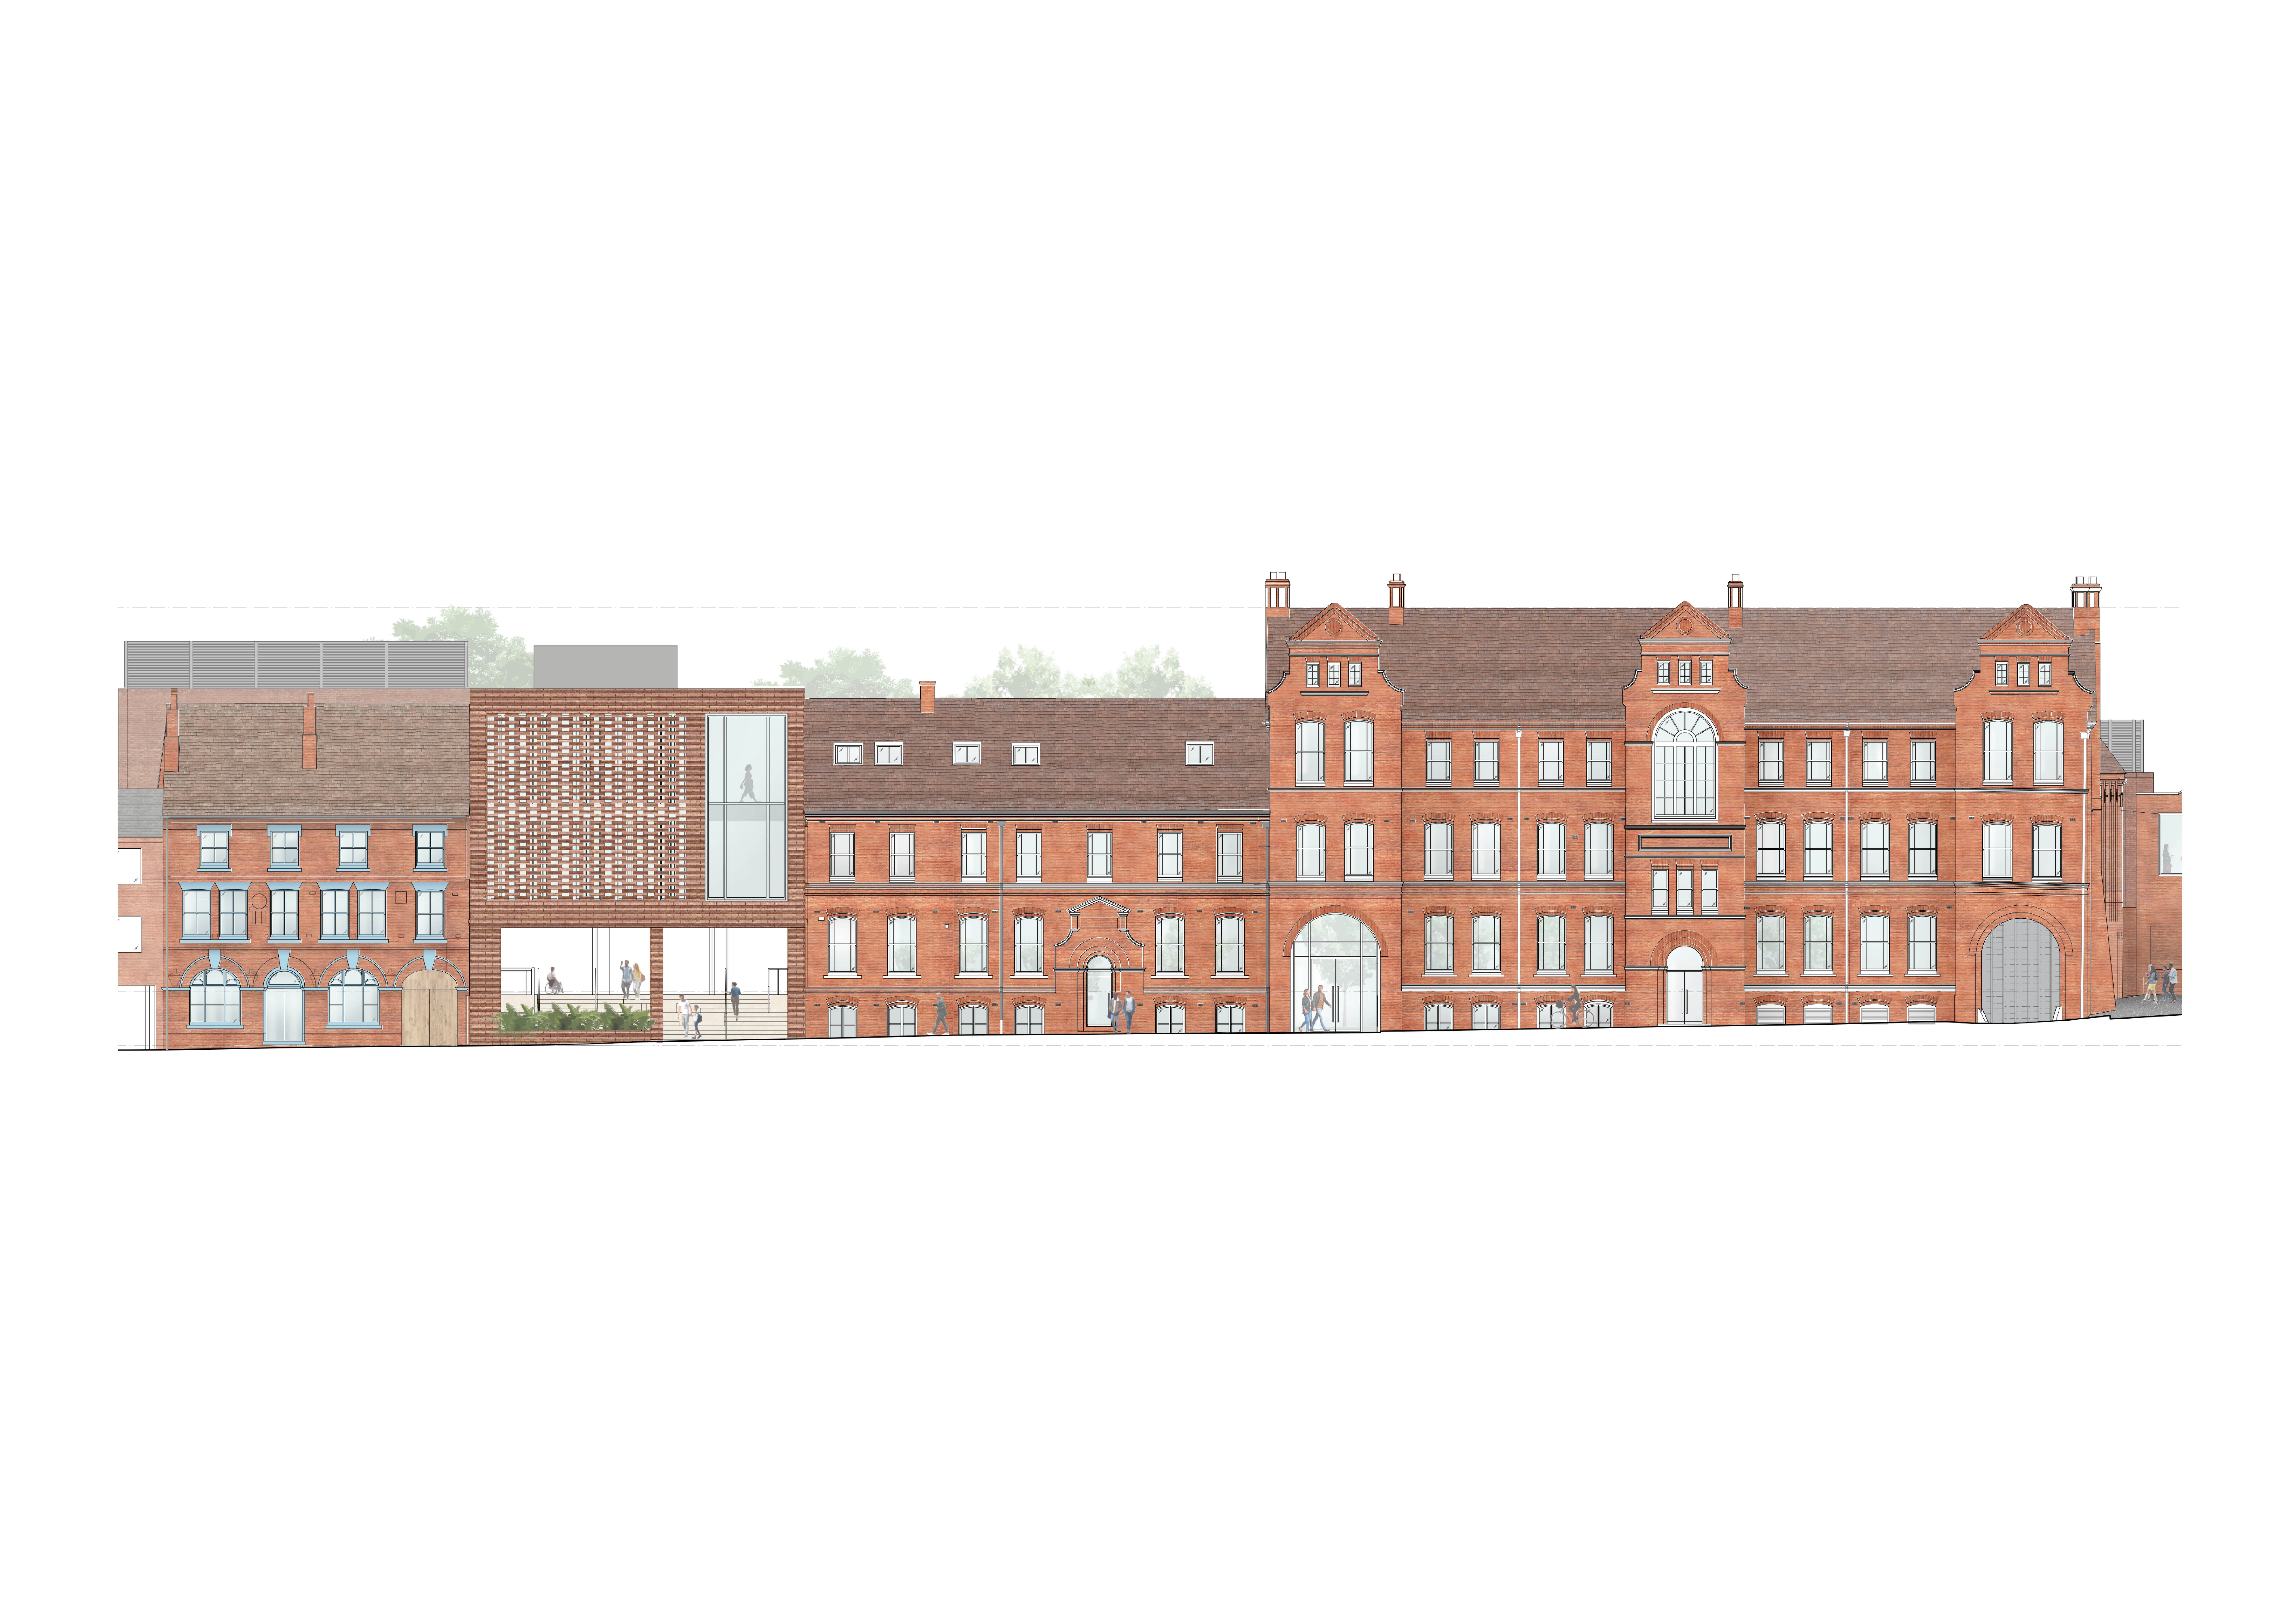 Artists impression - a cross section of what the front of the Former Magistrates Court in Kidderminster could look like in the future.